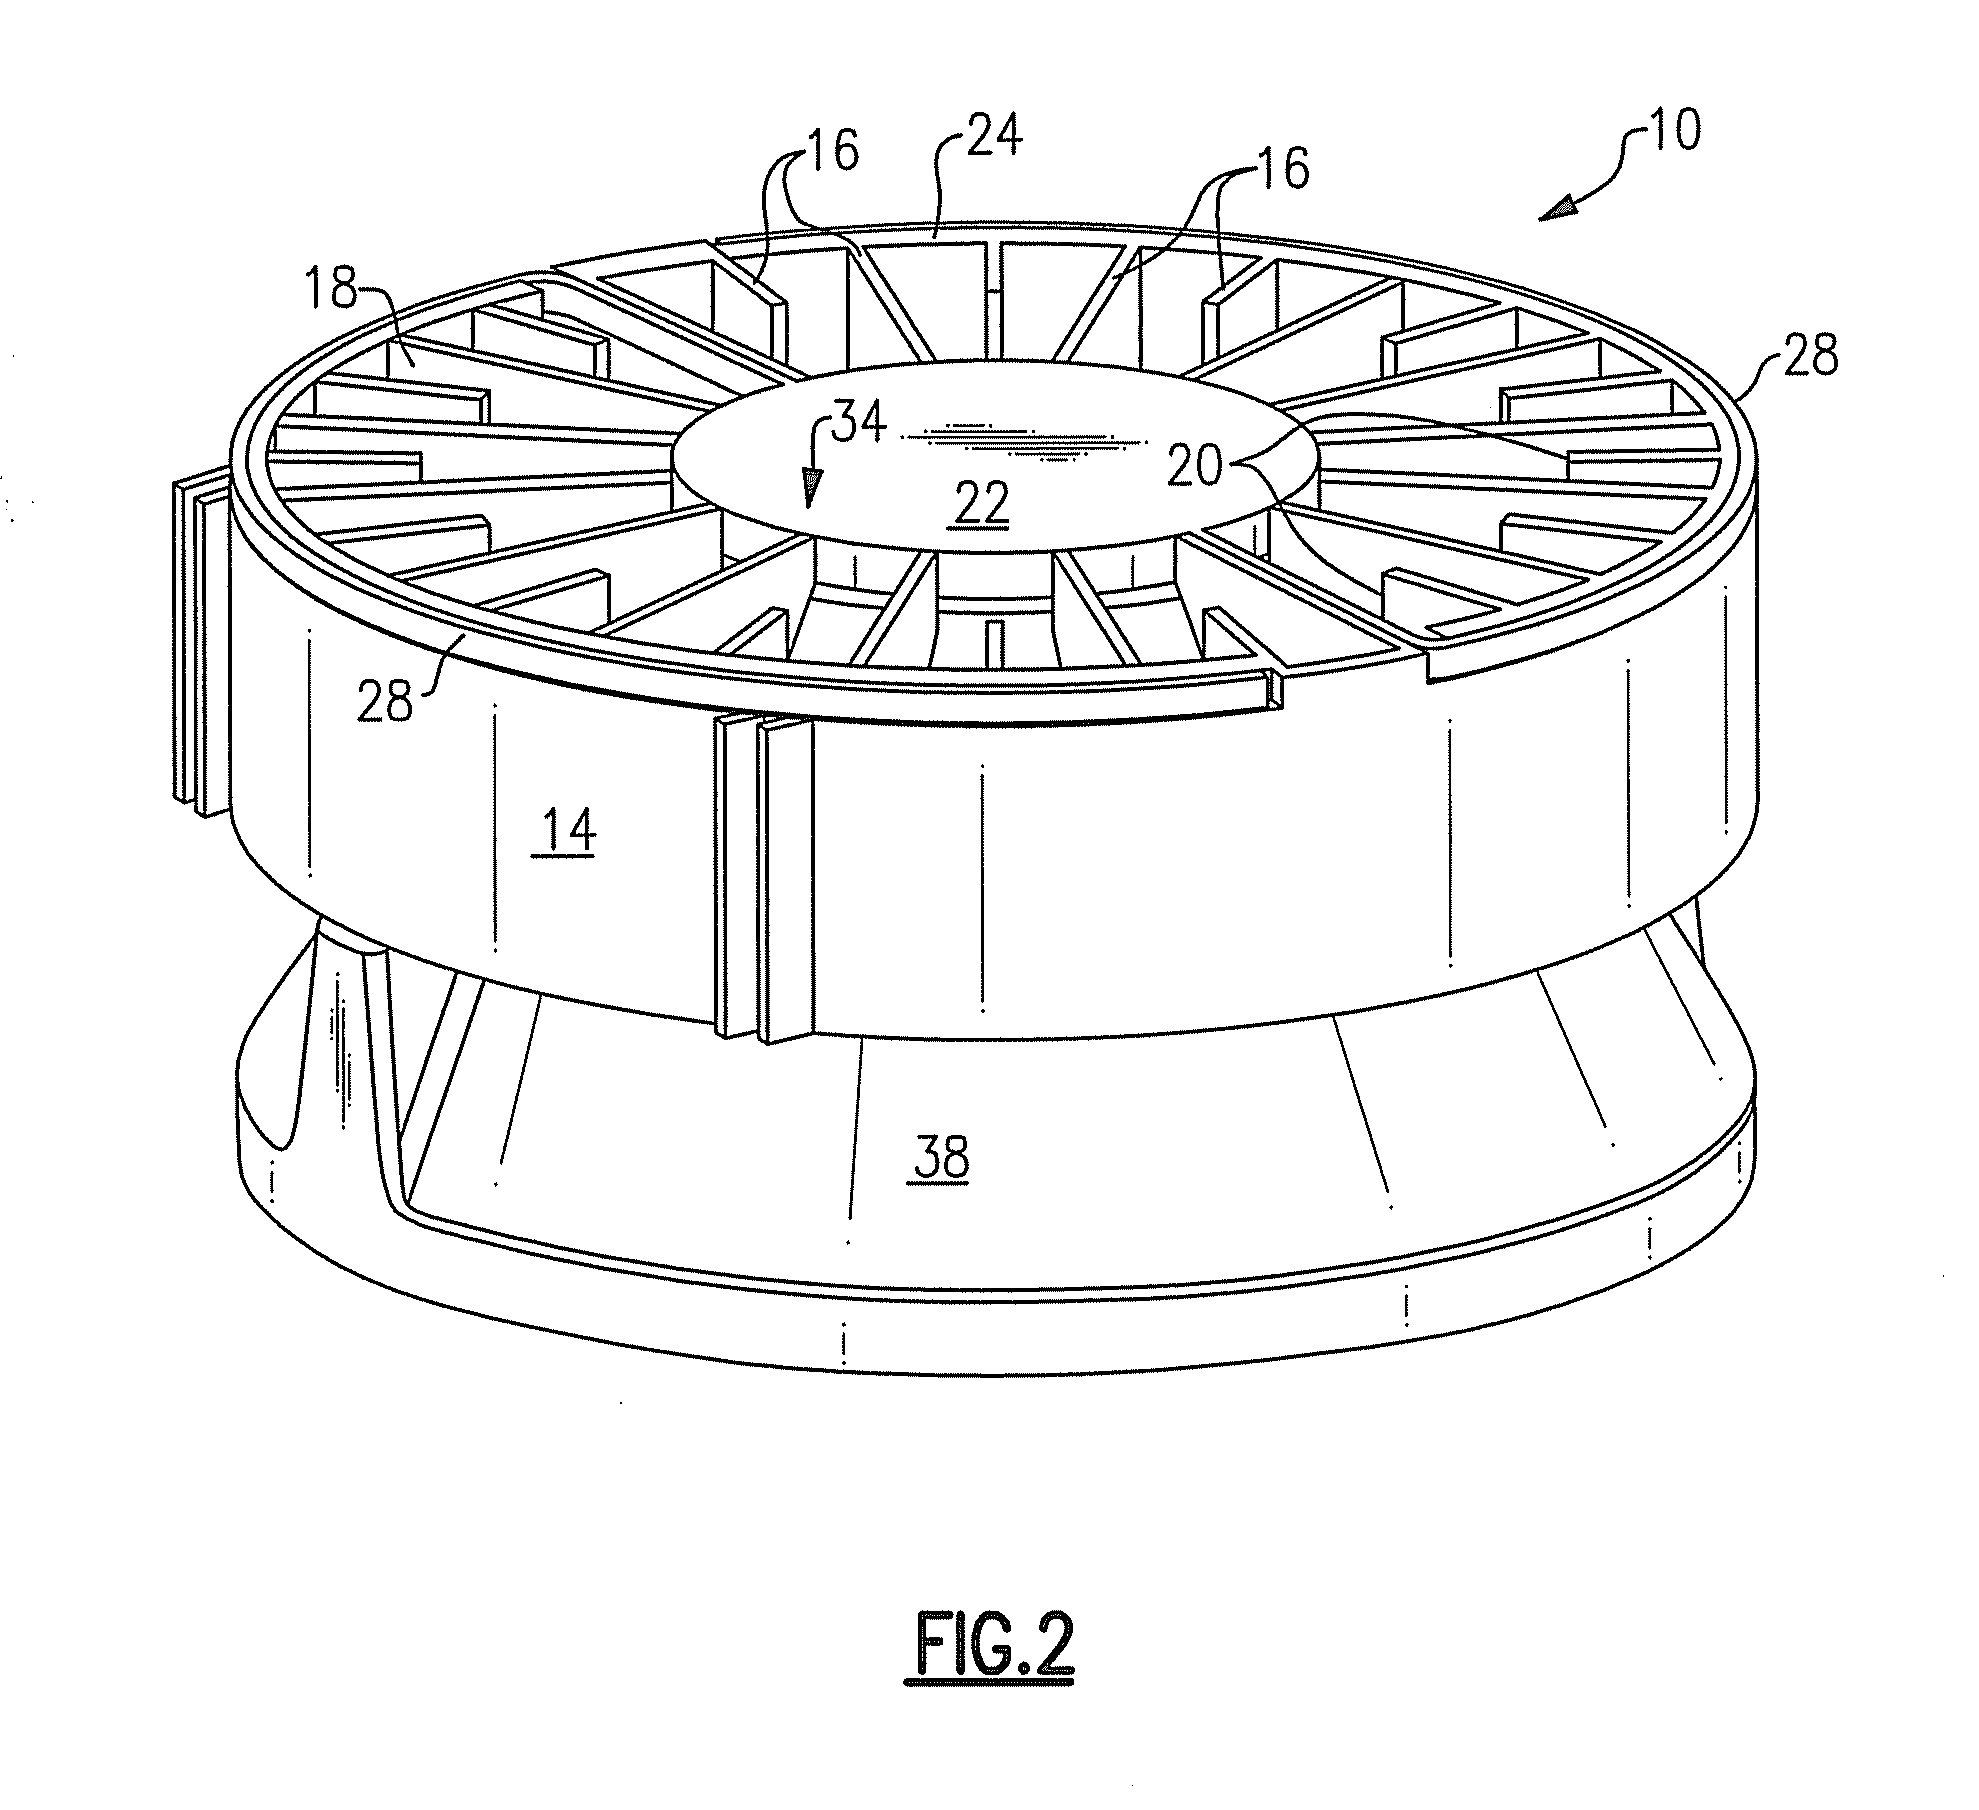 Lighting device with heat dissipation elements